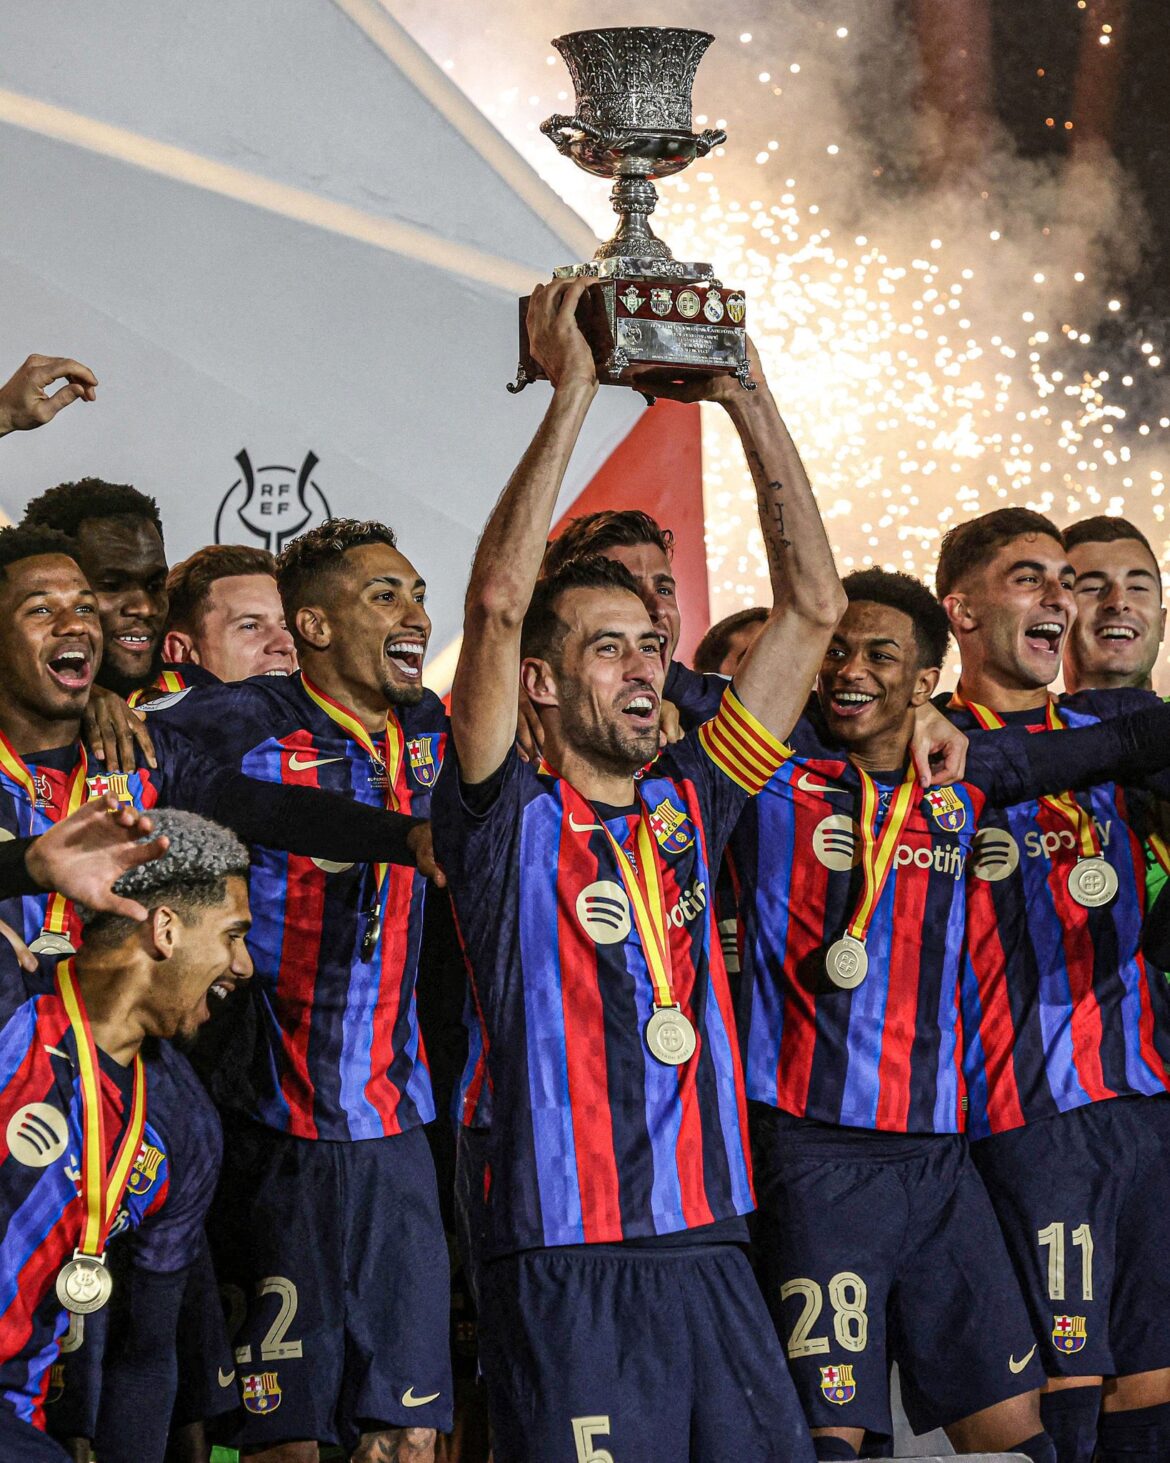 XAVI WINS HIS FIRST TITLE OF HIS BARCA CAREER